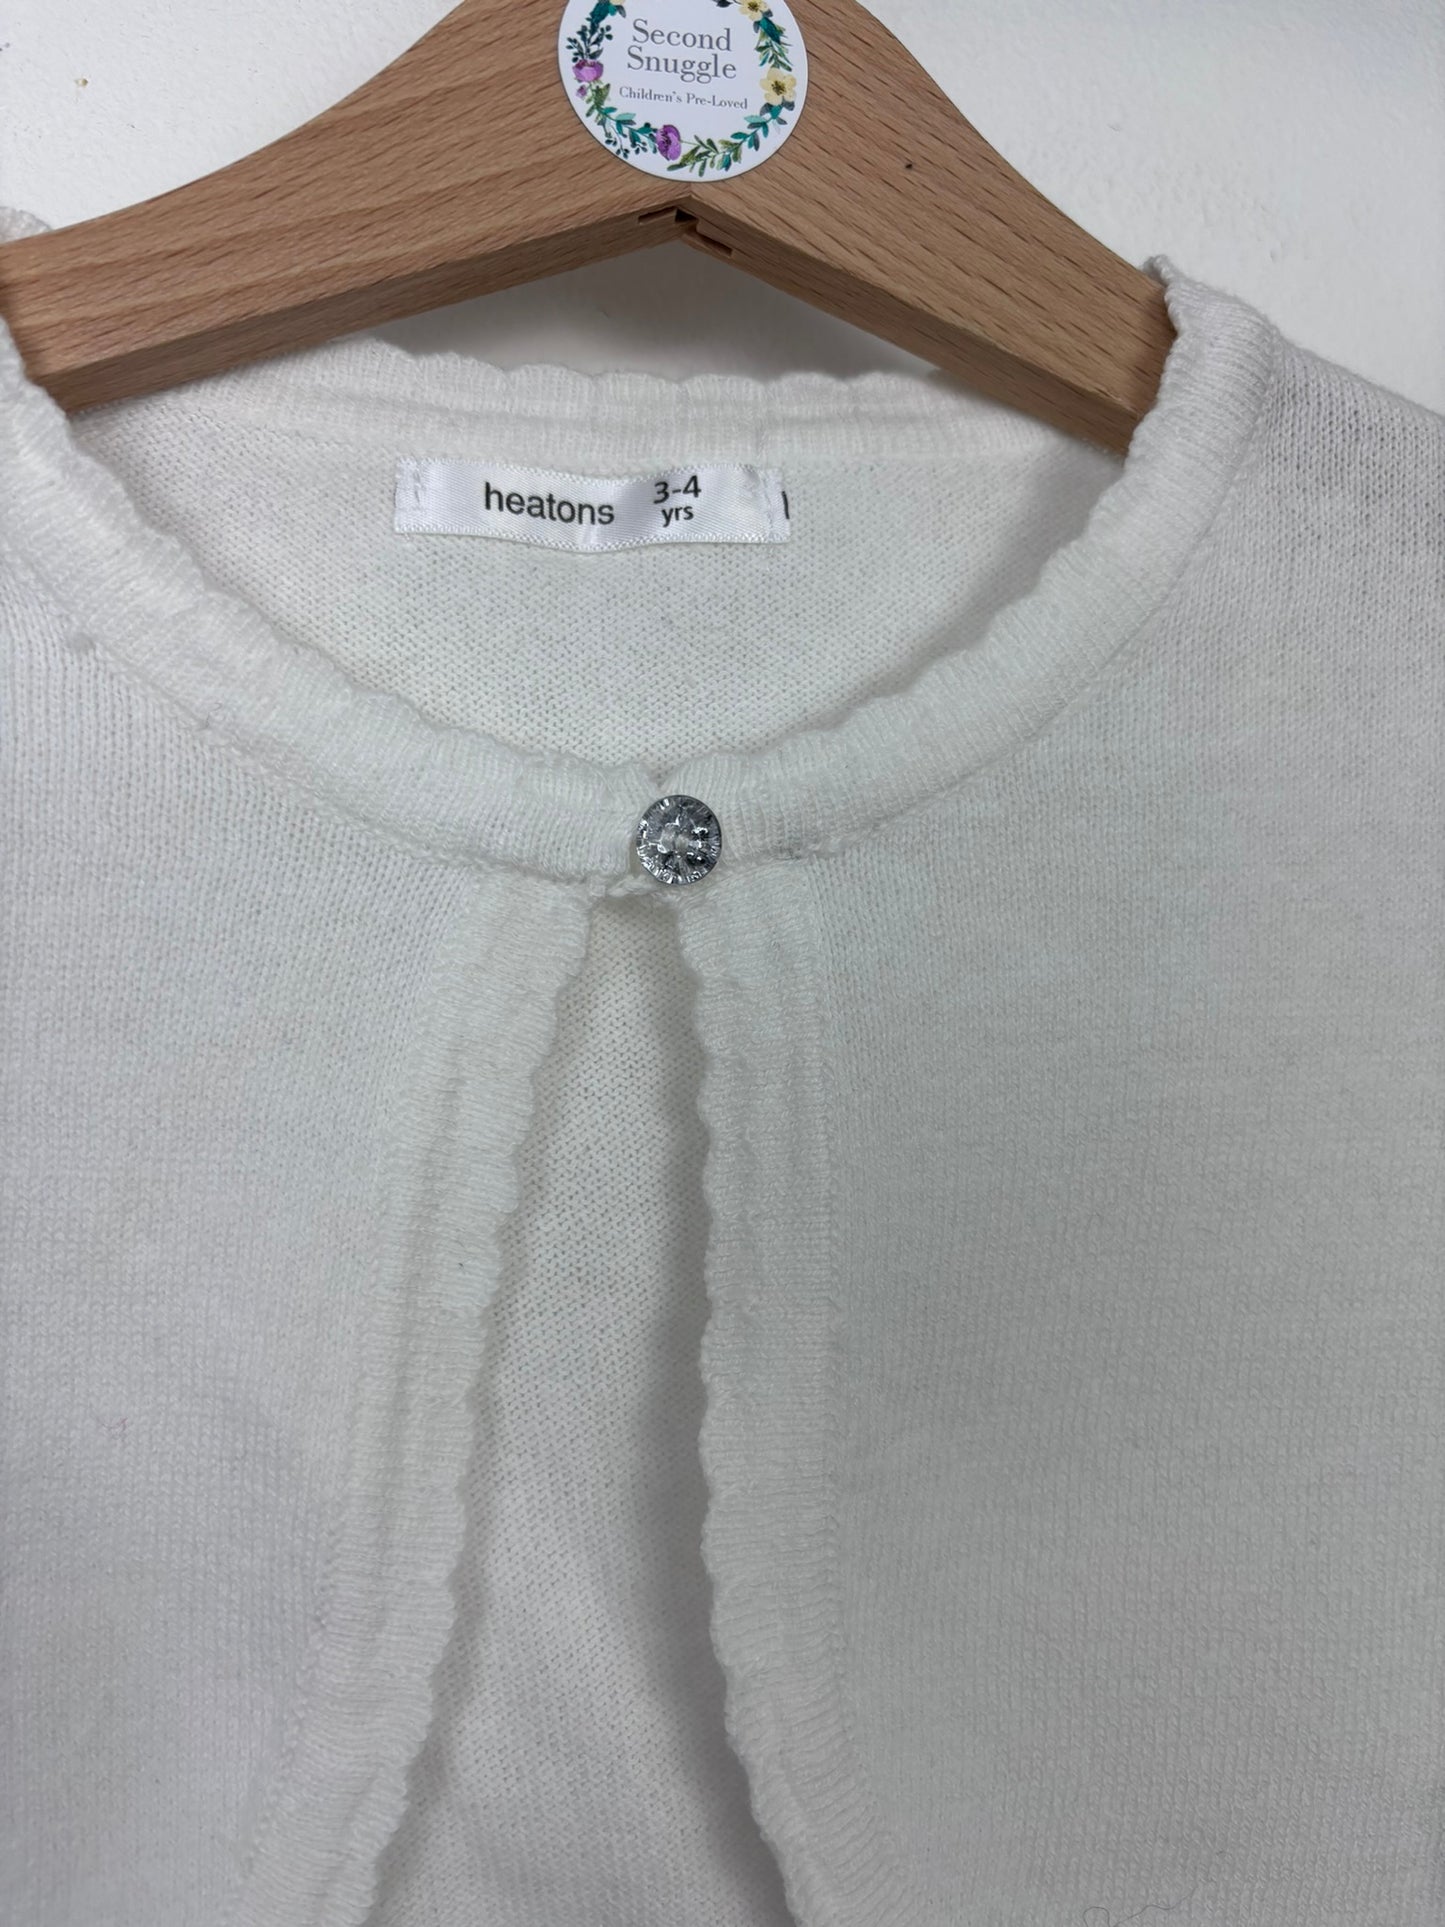 Heatons 3-4 Years-Cardigans-Second Snuggle Preloved